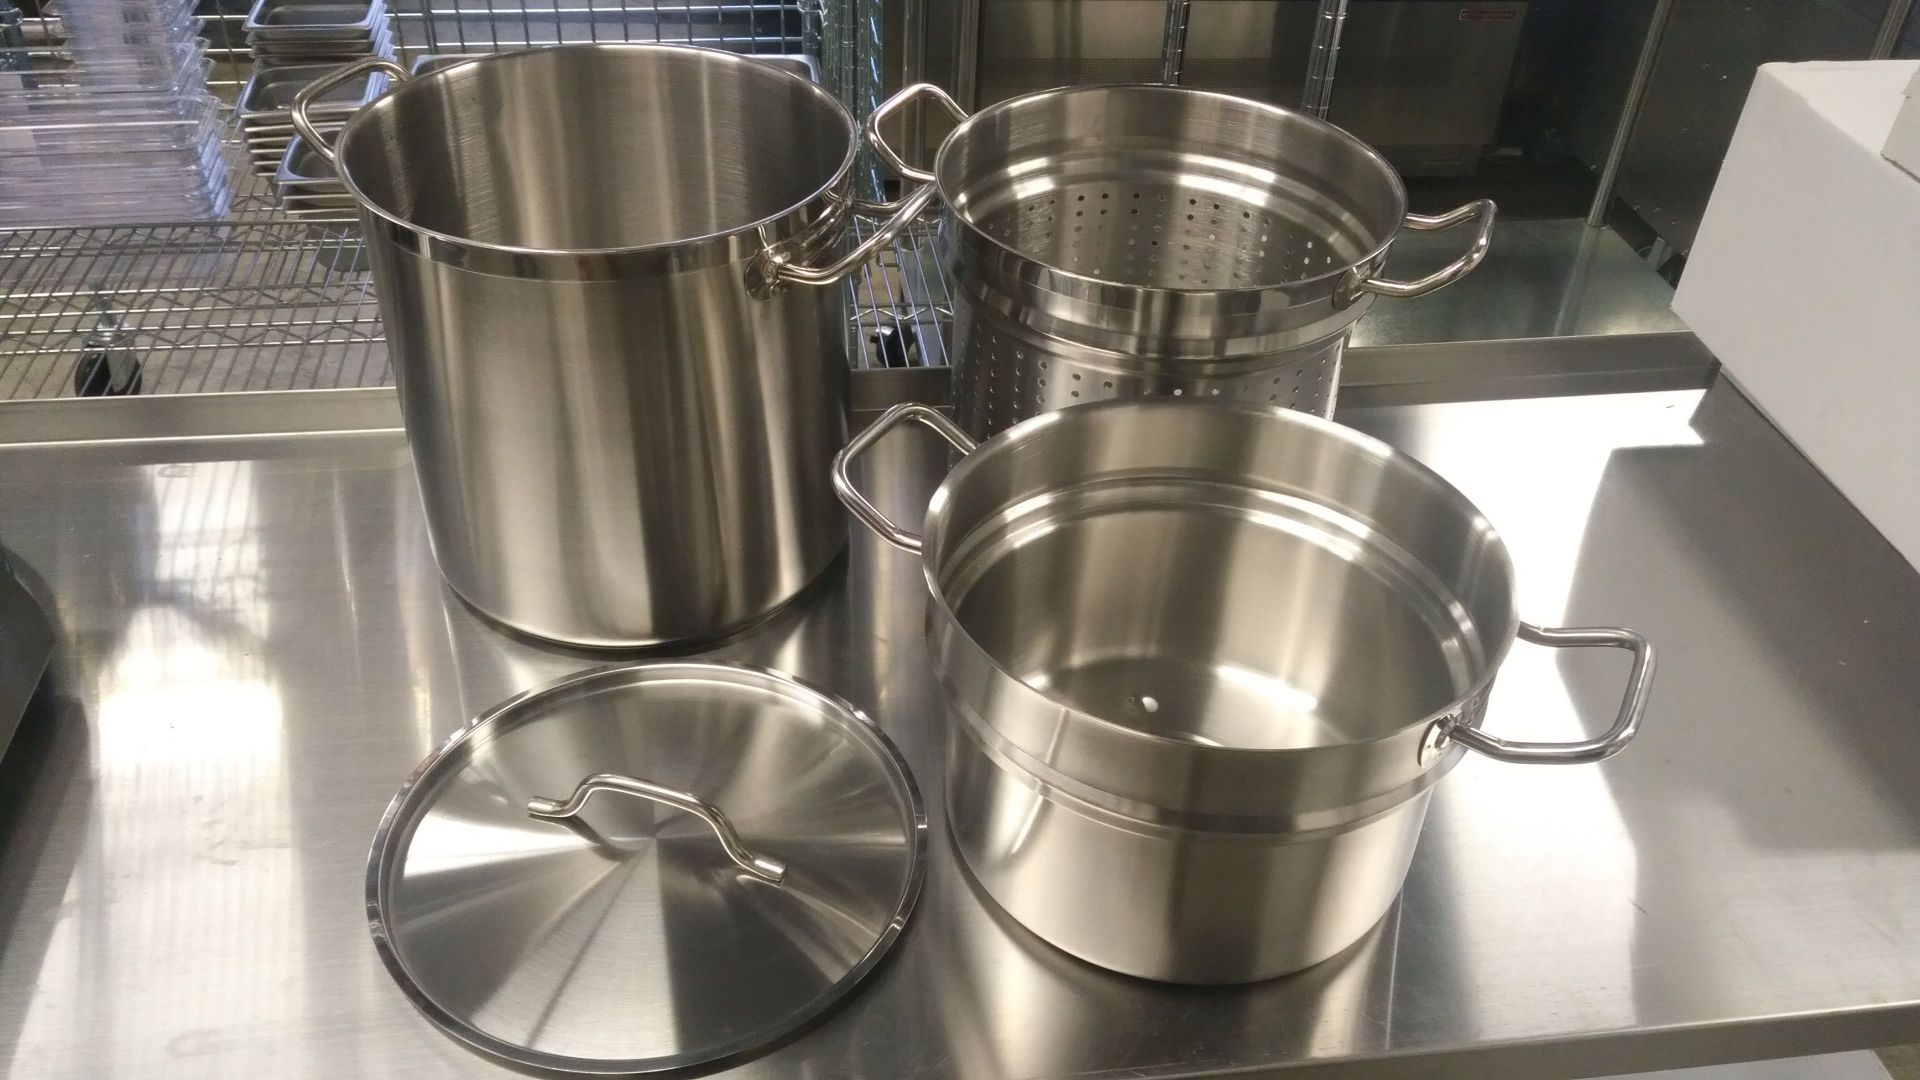 20qt Heavy Duty Stainless Stock Pot with Steamer Basket and Double Boiler